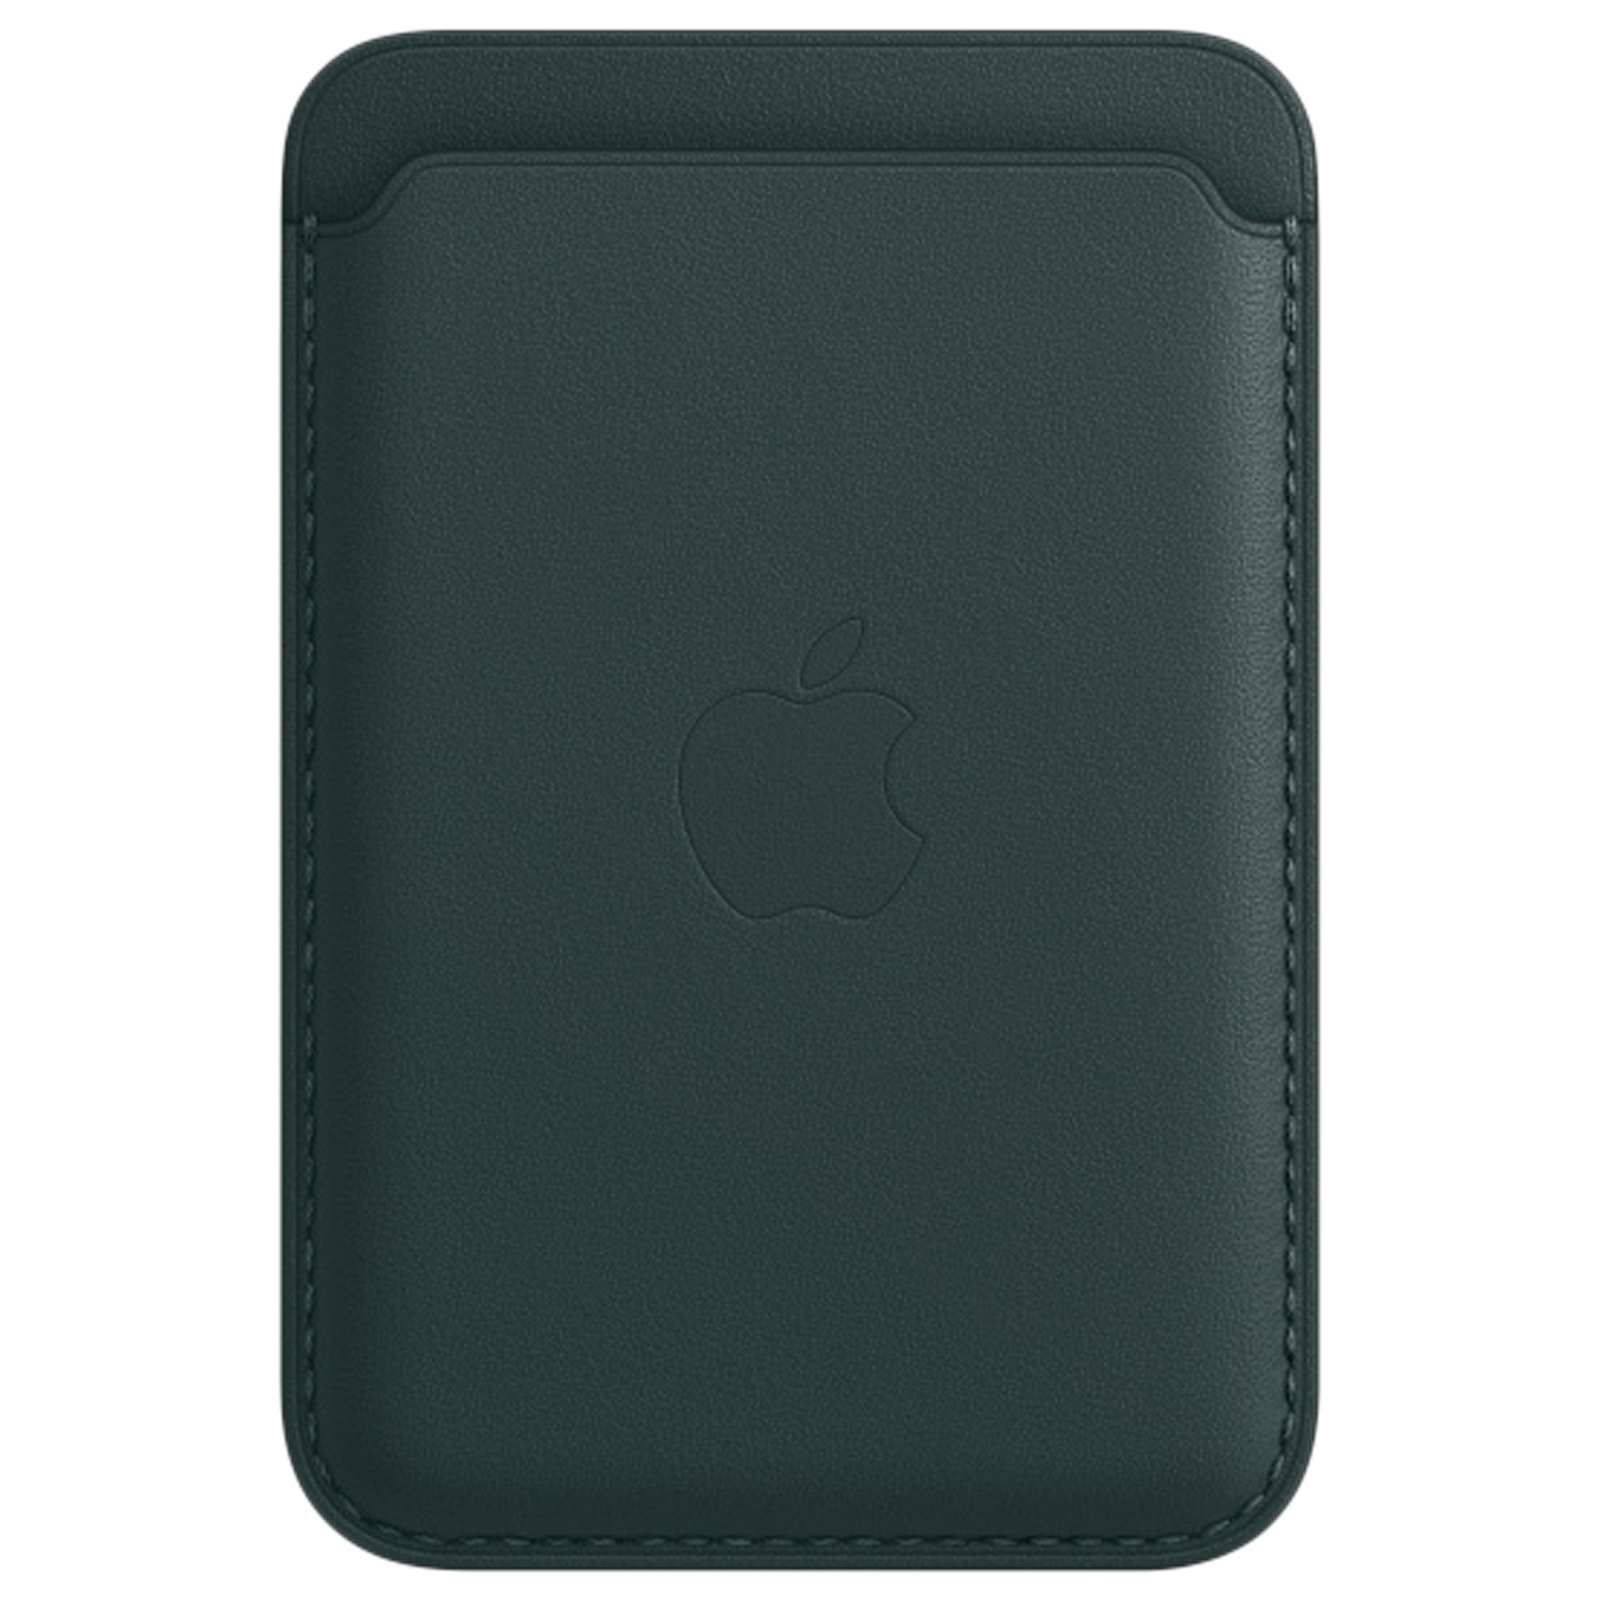 Apple Leather Wallet (MagSafe, MPPT3ZM/A, Forest Green)